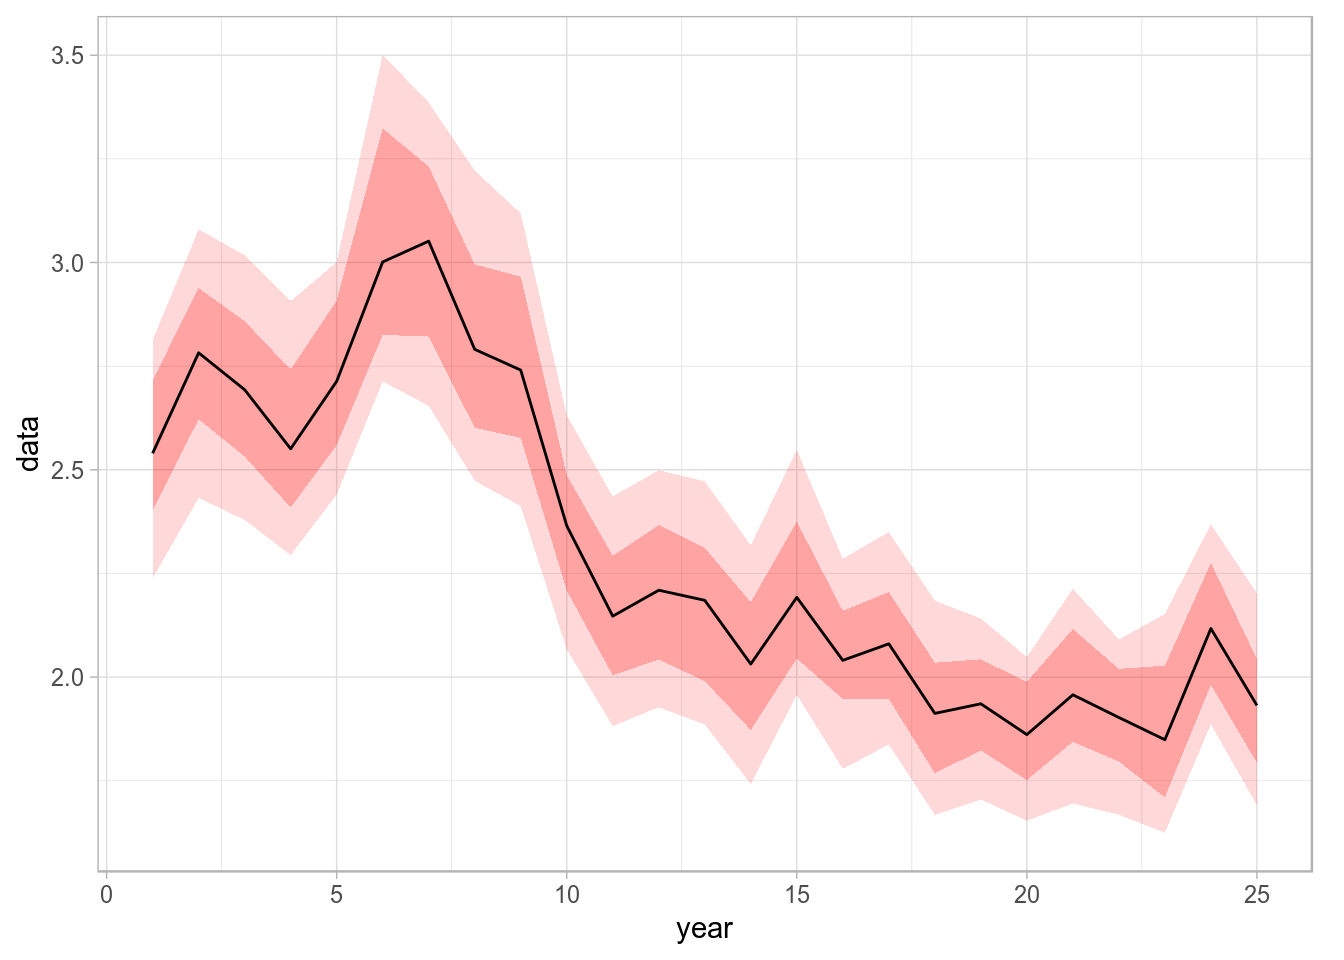 Time series with 75% and 90% credibility intervals plotted using geom_ribbon.